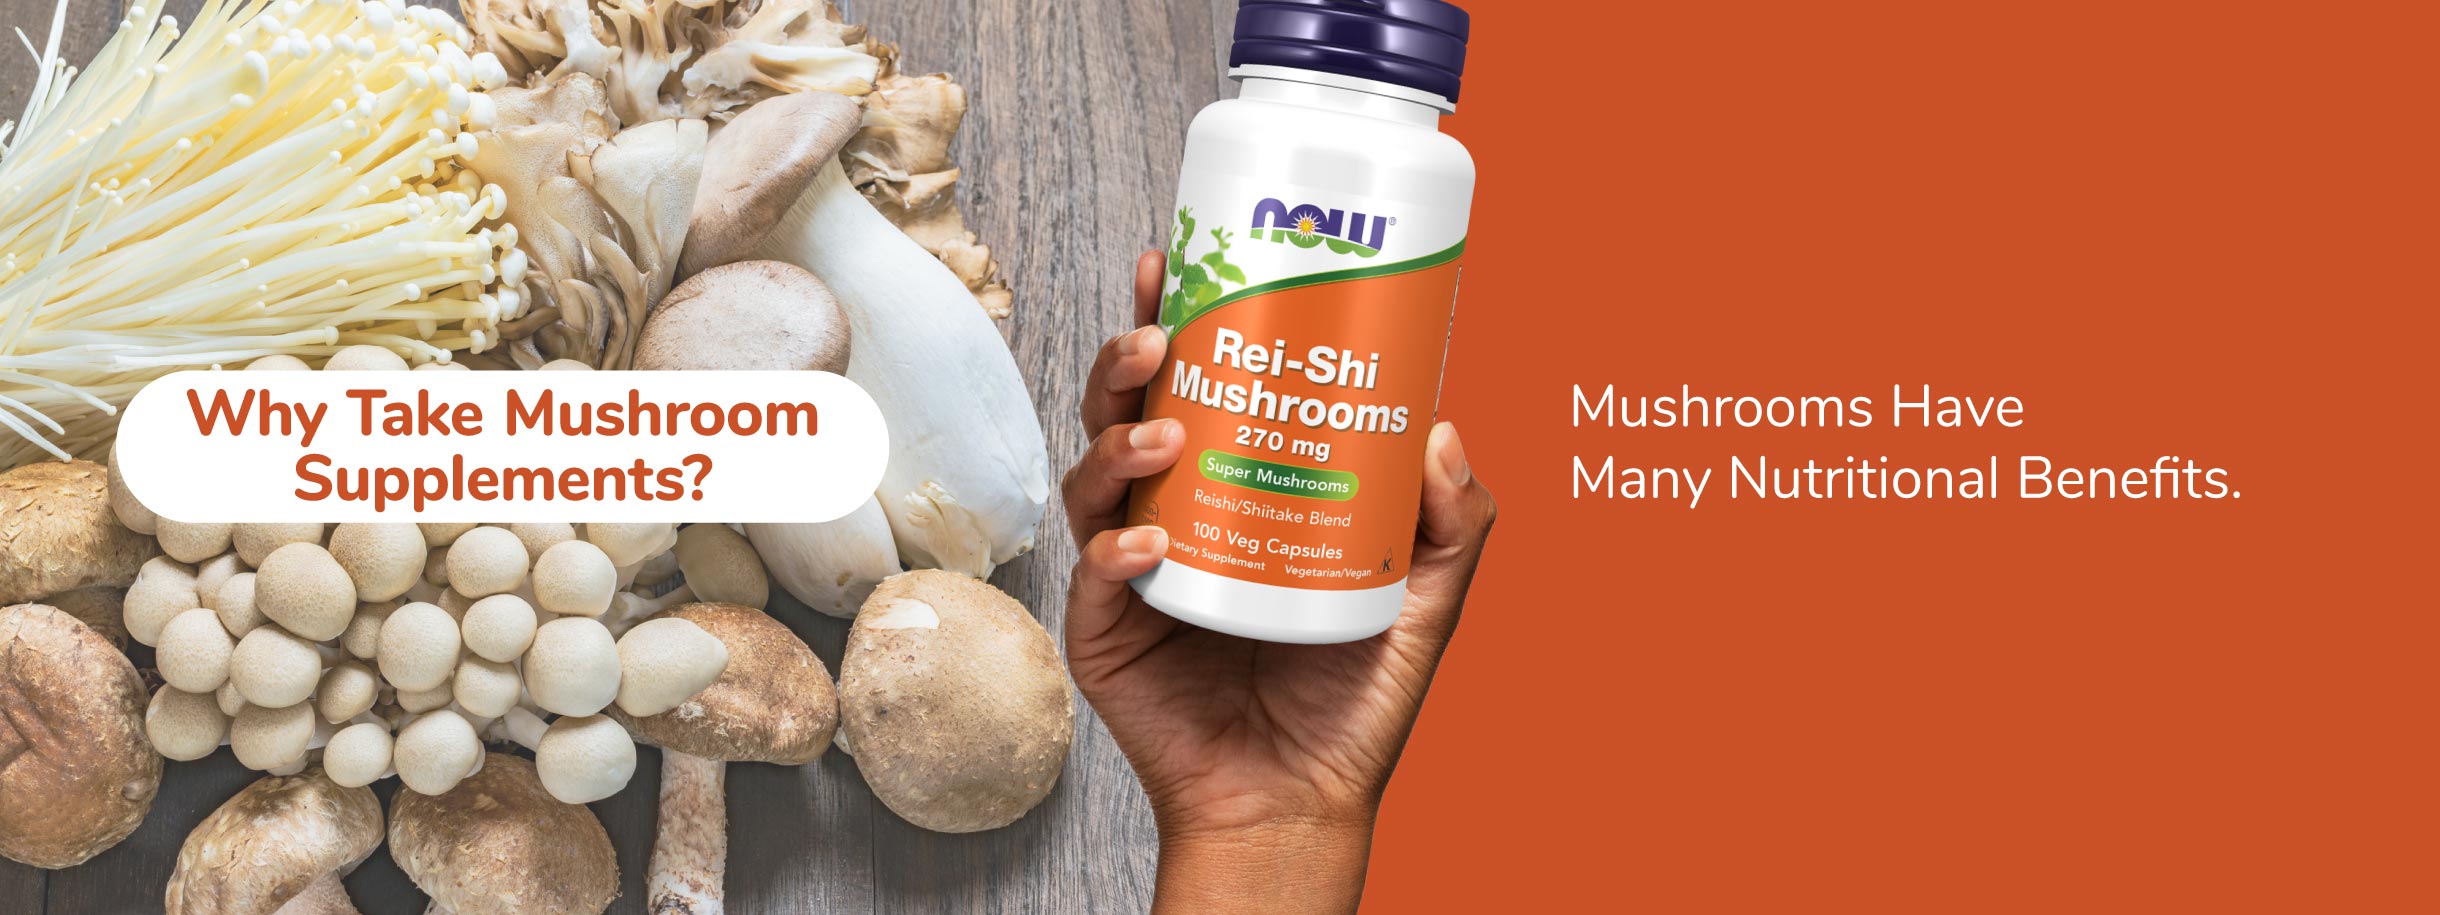 Why Take Mushroom Supplements? Mushrooms Have Many Nutritional Benefits